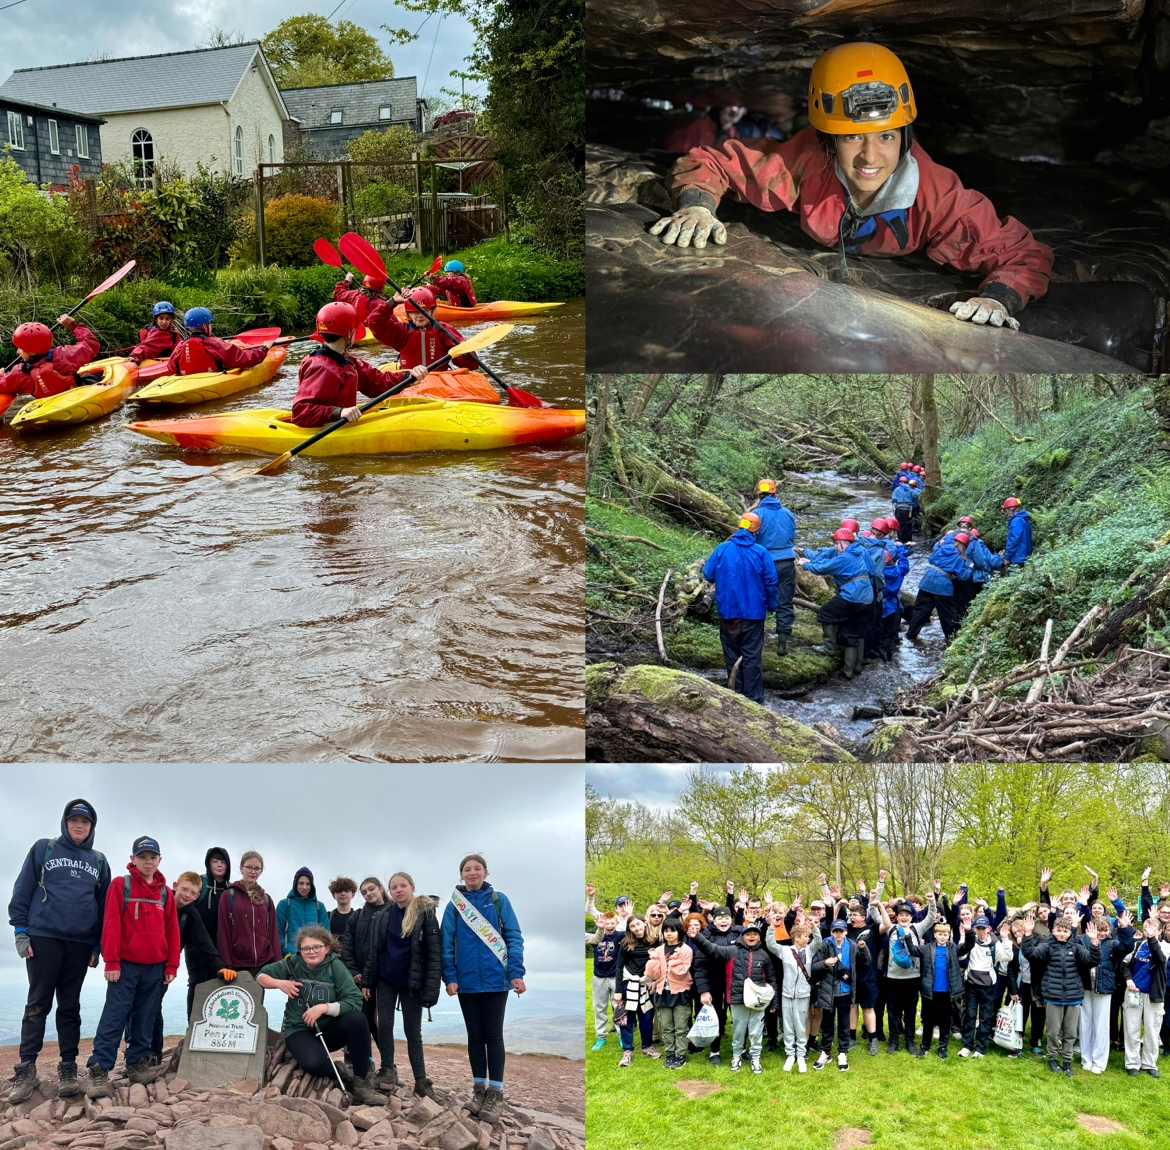 47 yr8 students completed 6 days of outdoor adventure in Wales, taking part in mountain walking, canoeing & kayaking, rock climbing, caving and gorge walking. So much fun, adventure and memories!